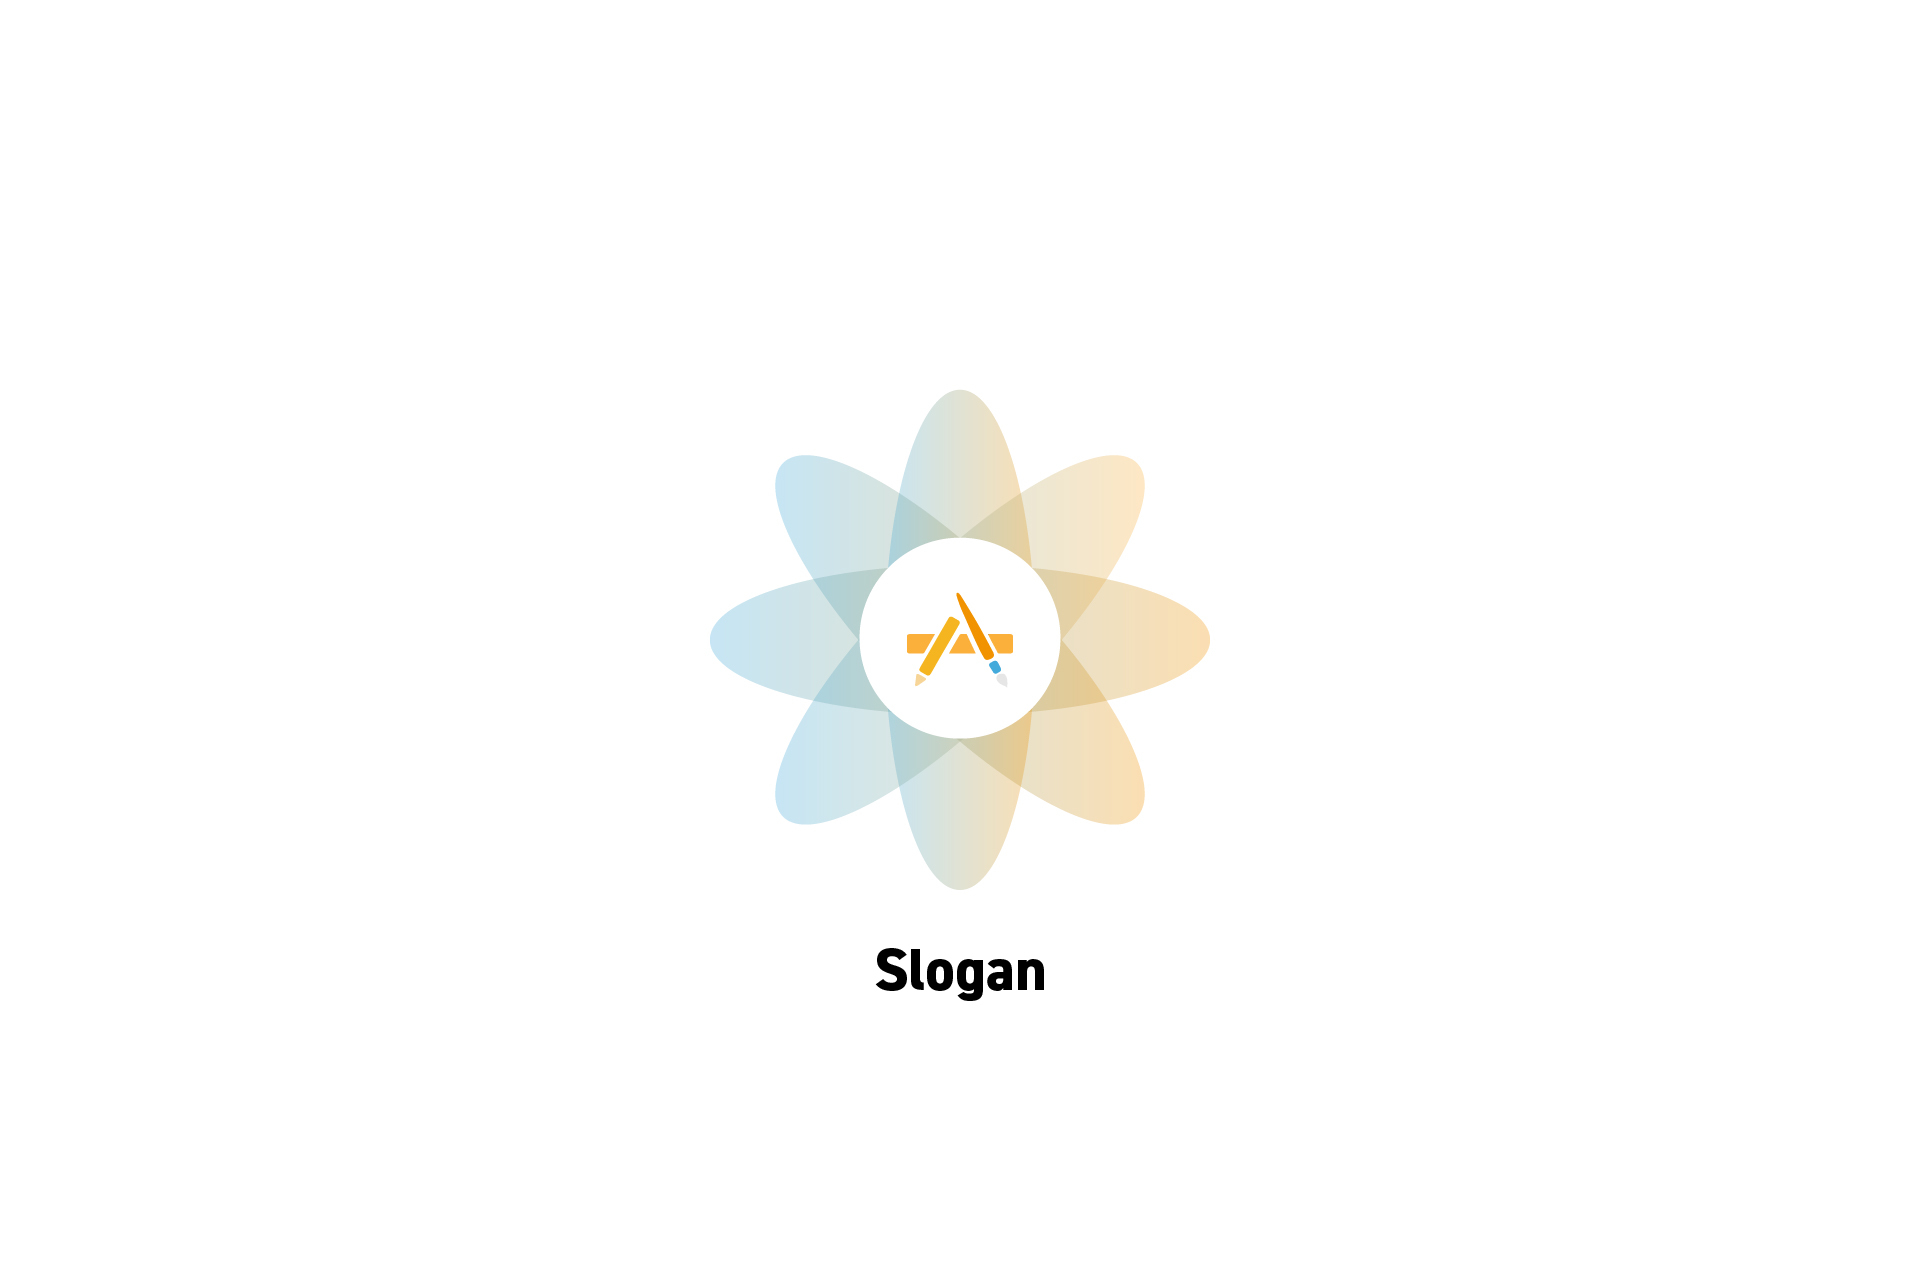 What is a Slogan?